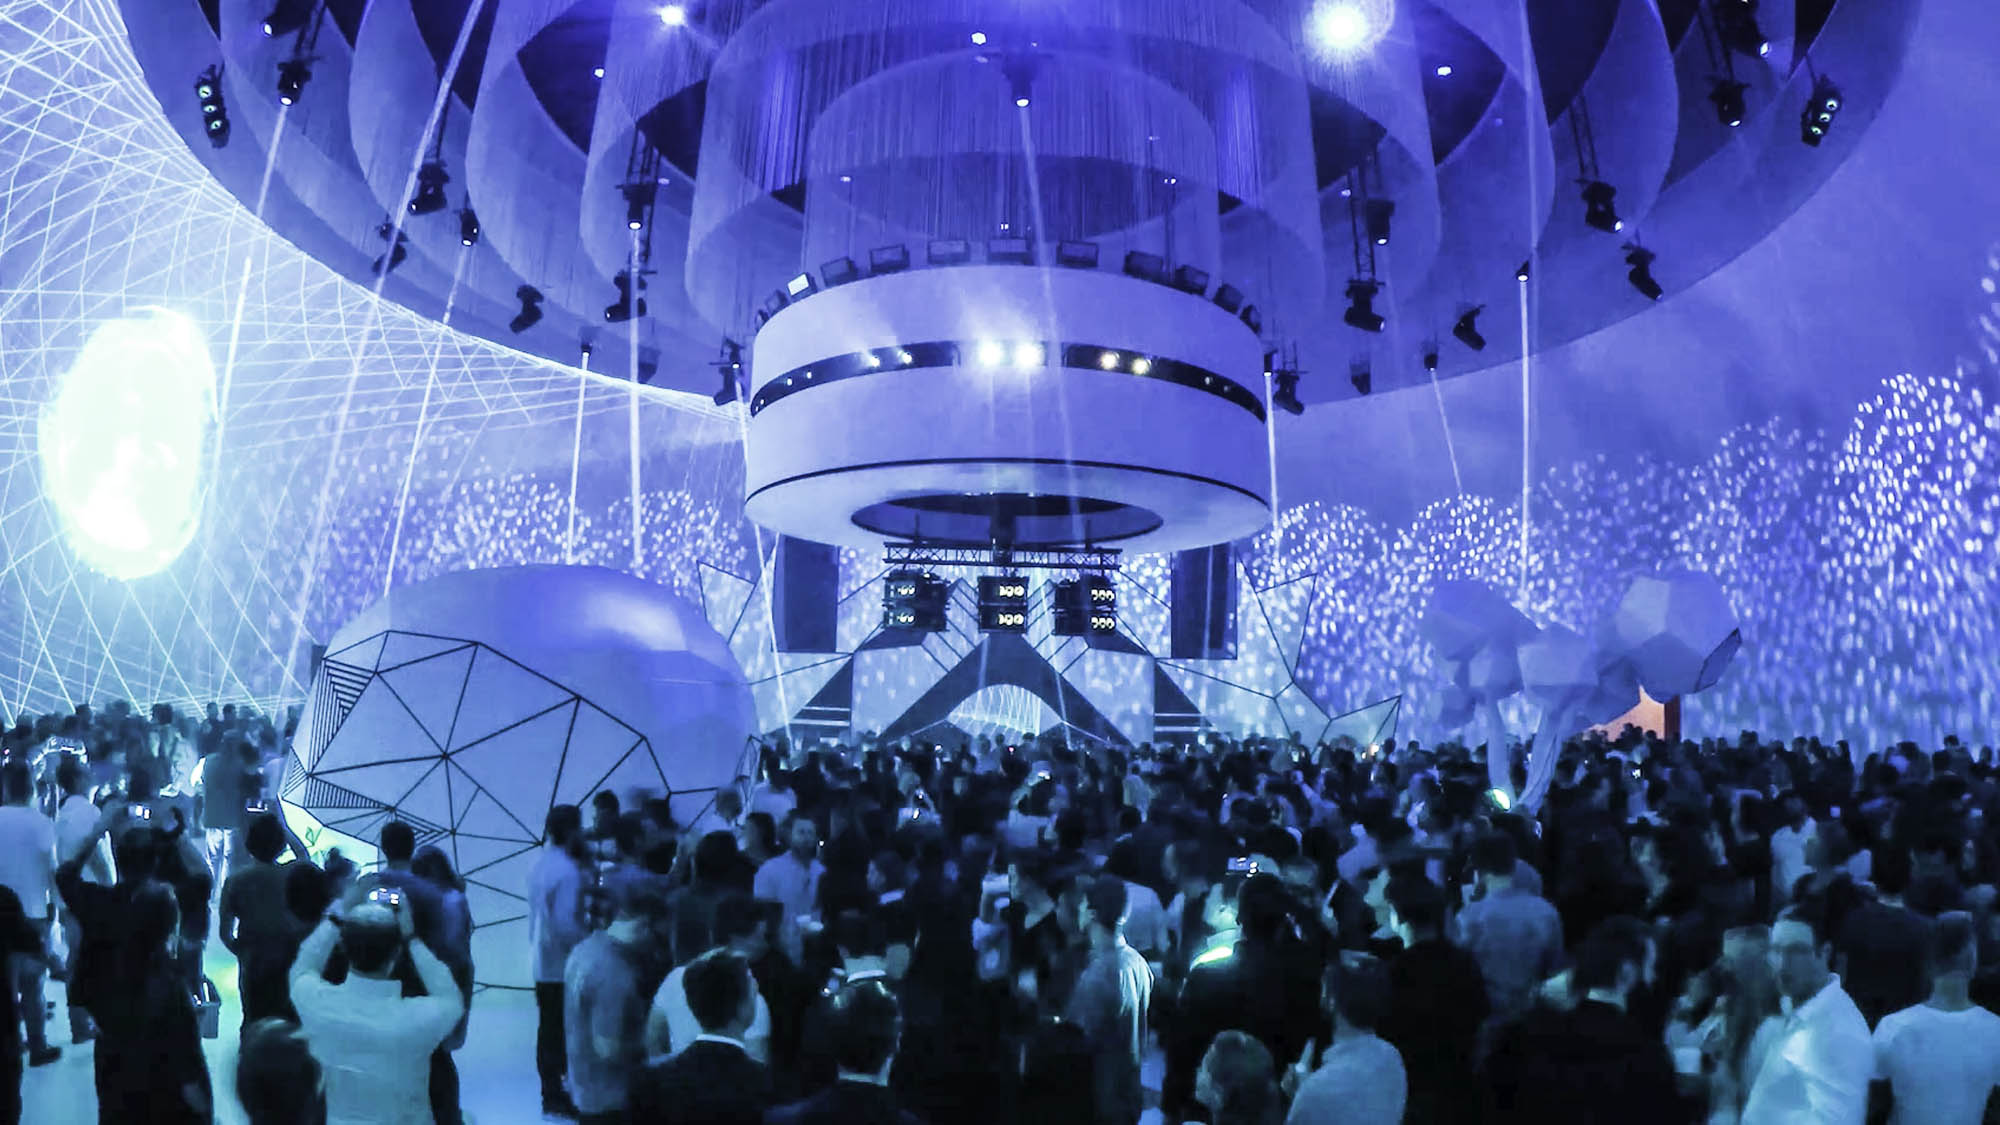 fulldome mapping show, 360, immersive art, installation, new media art, projection mapping, visuals